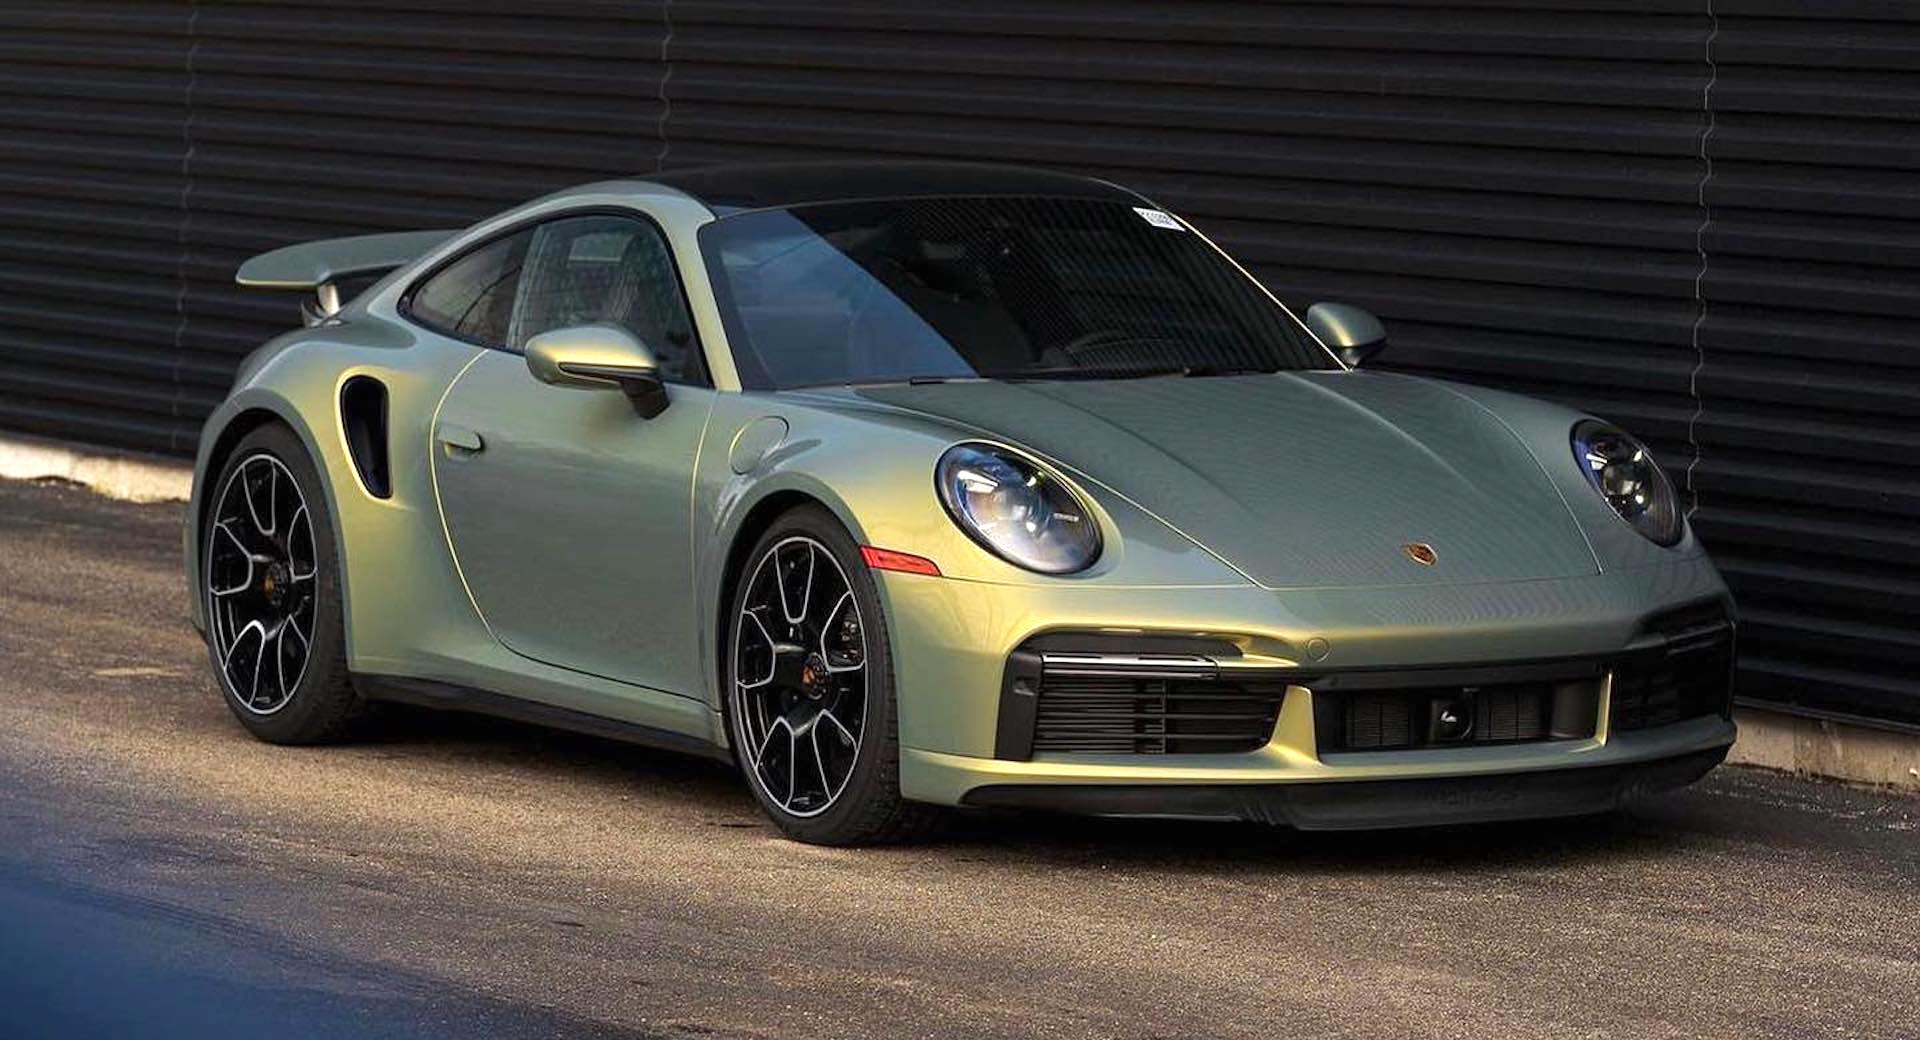 Dealer Puts A $100,000 Markup On New Porsche 911 Turbo S That Has